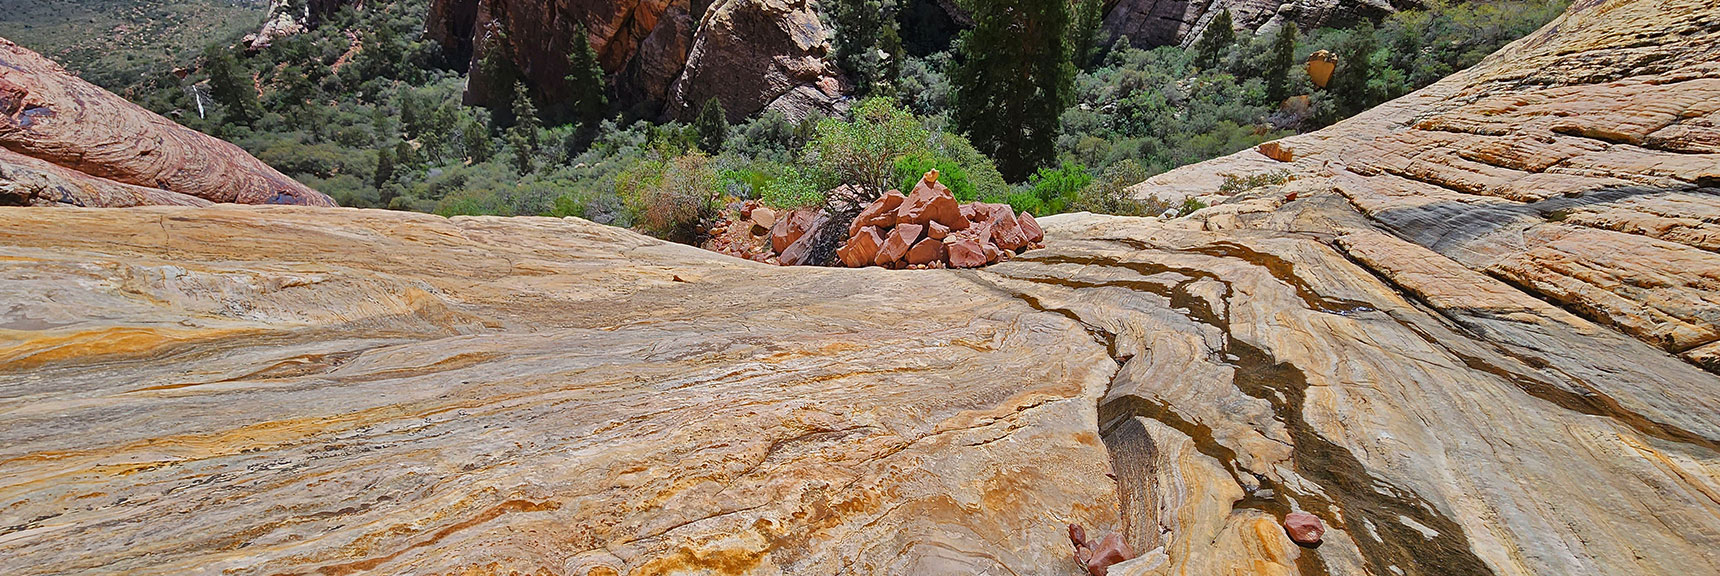 This is What I Mean! No Room for Error! Will Return with Rock Climbing Shoes! | Juniper Canyon | Red Rock Canyon National Conservation Area, Nevada | David Smith | LasVegasAreaTrails.com